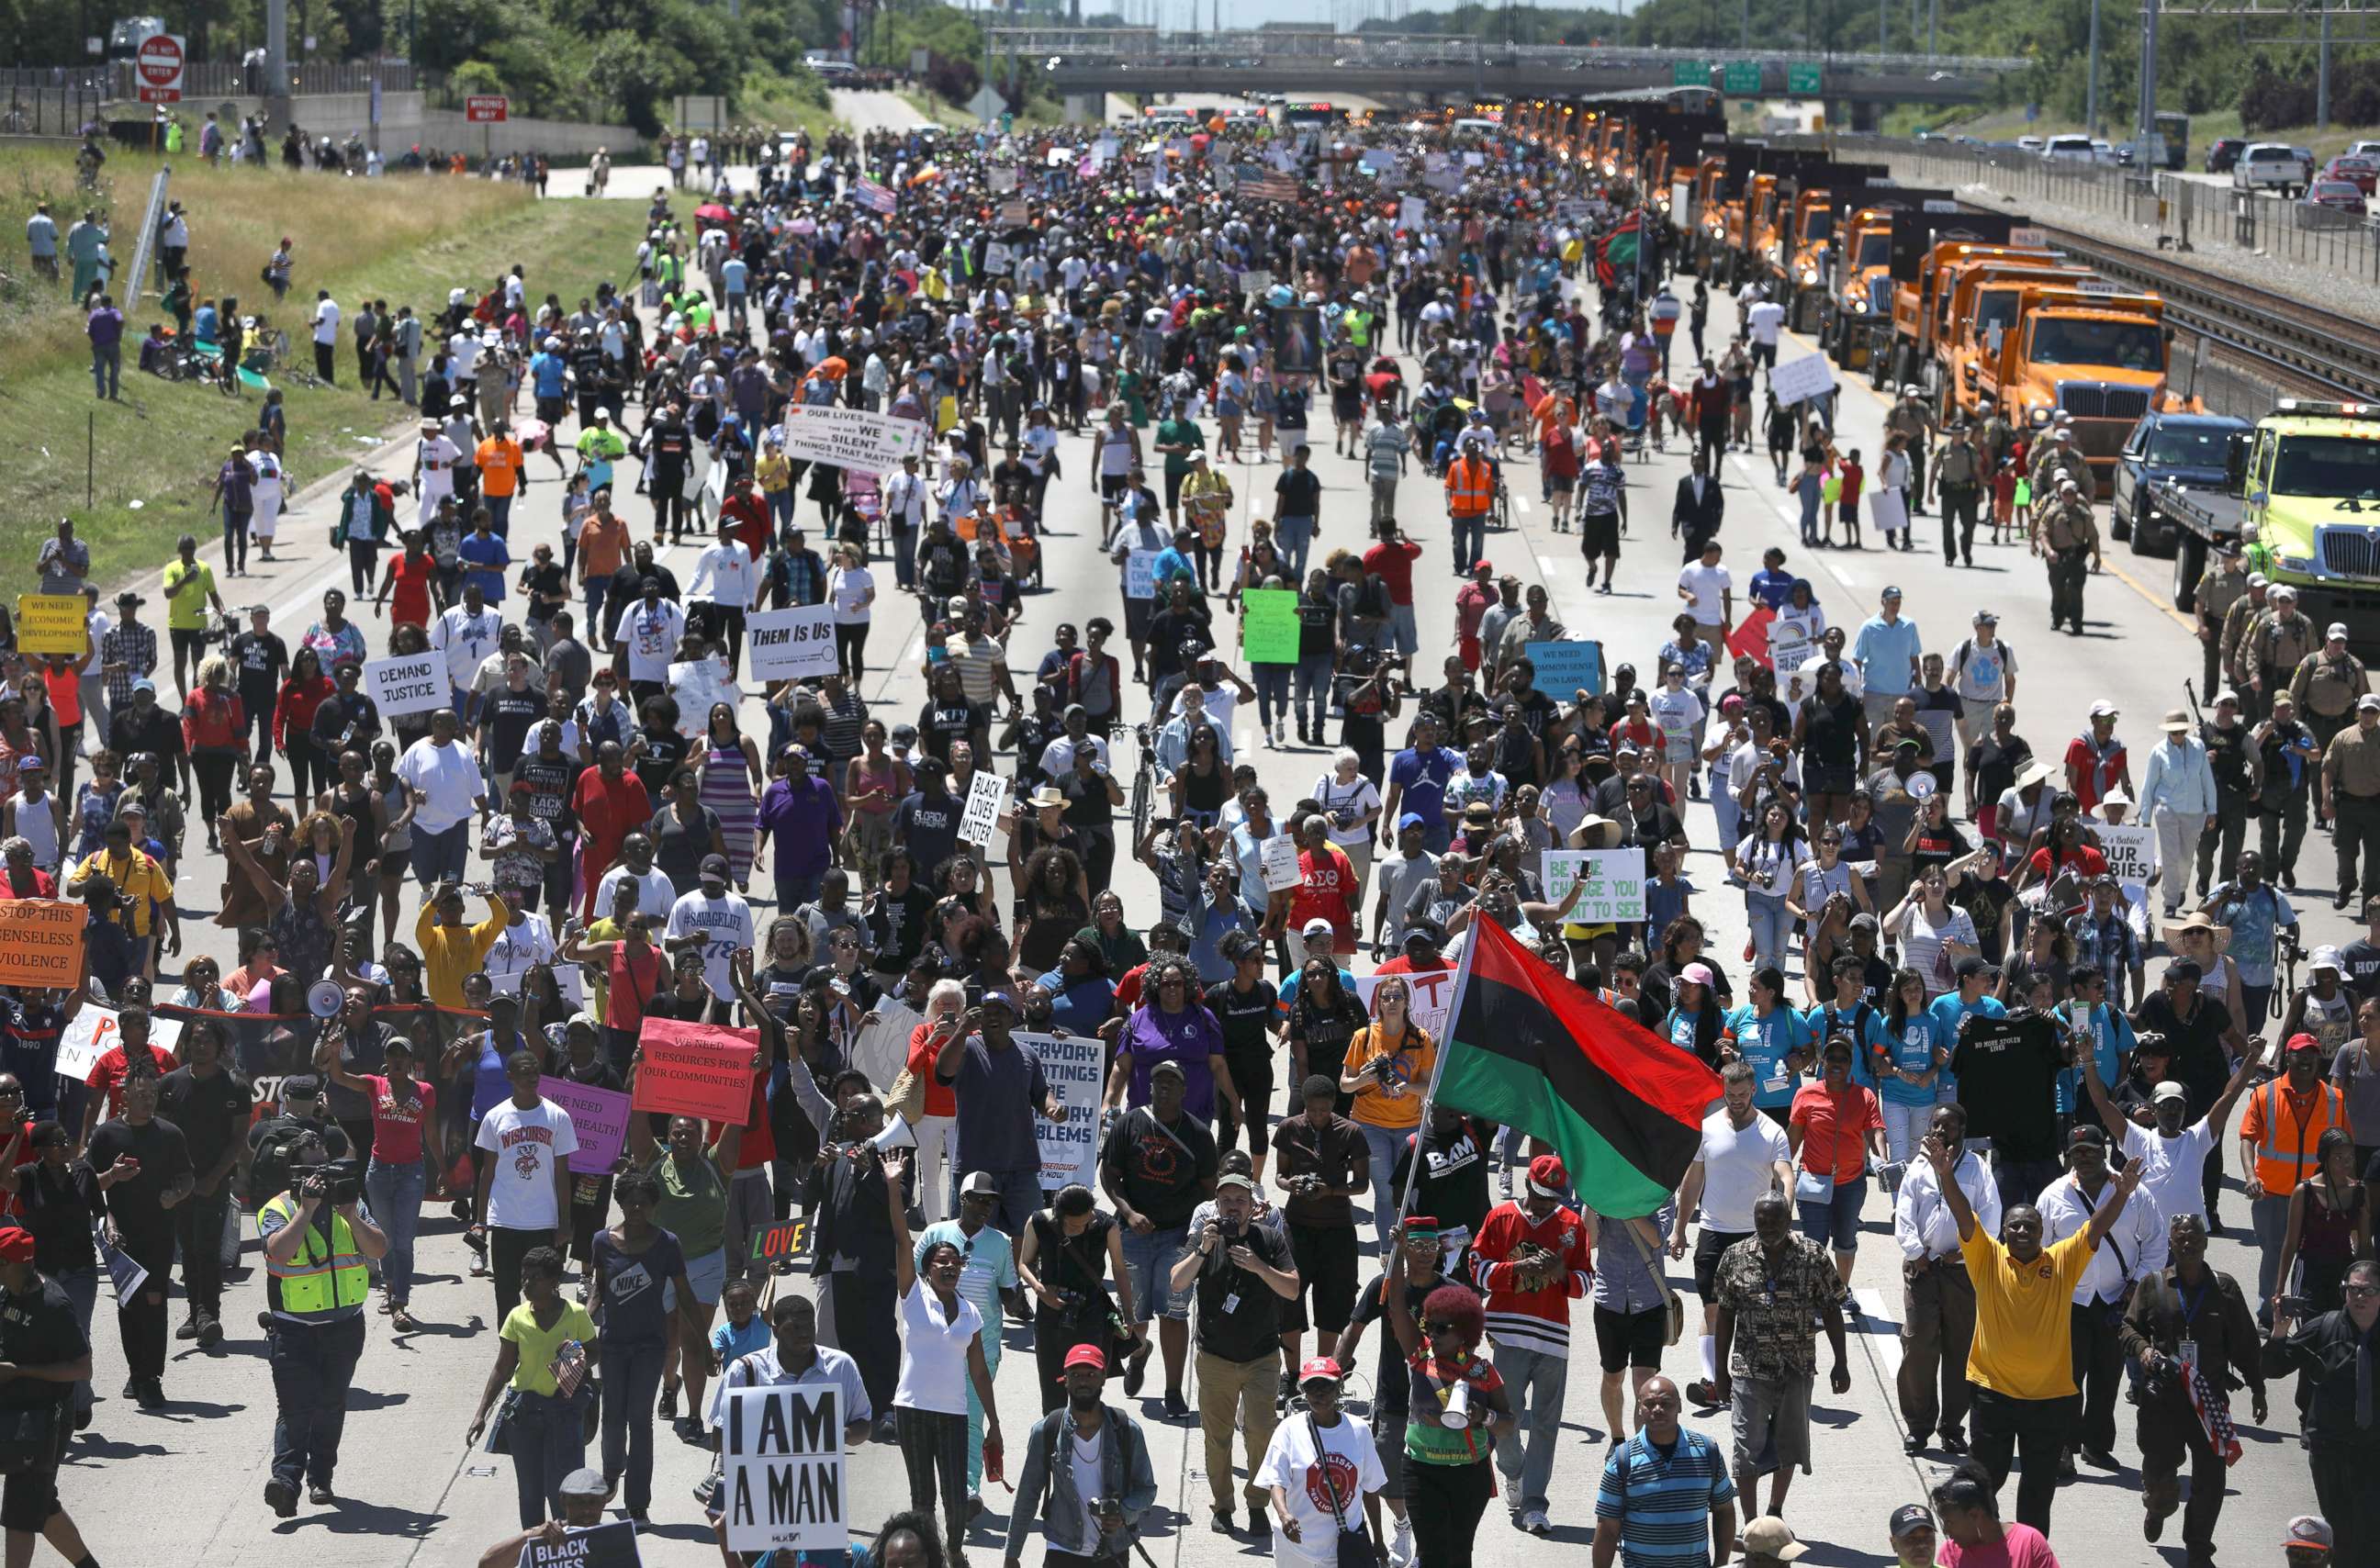 PHOTO: Thousands of protesters walk north on the Dan Ryan Expressway in Chicago after blocking the transportation artery in an anti-violence march, July 7, 2018.